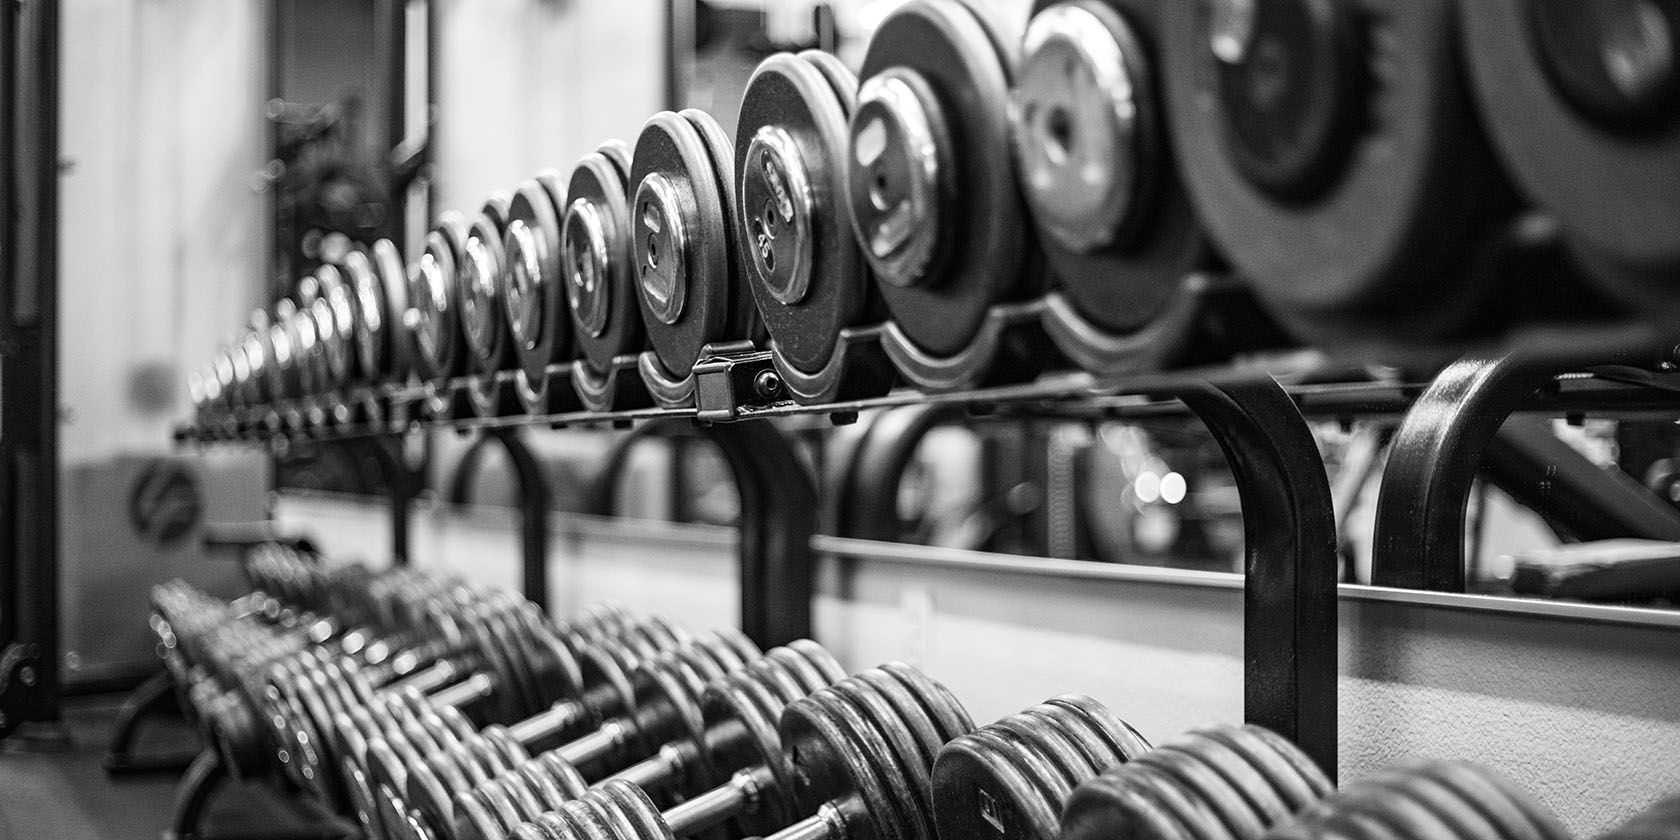 Row of weights in black and white